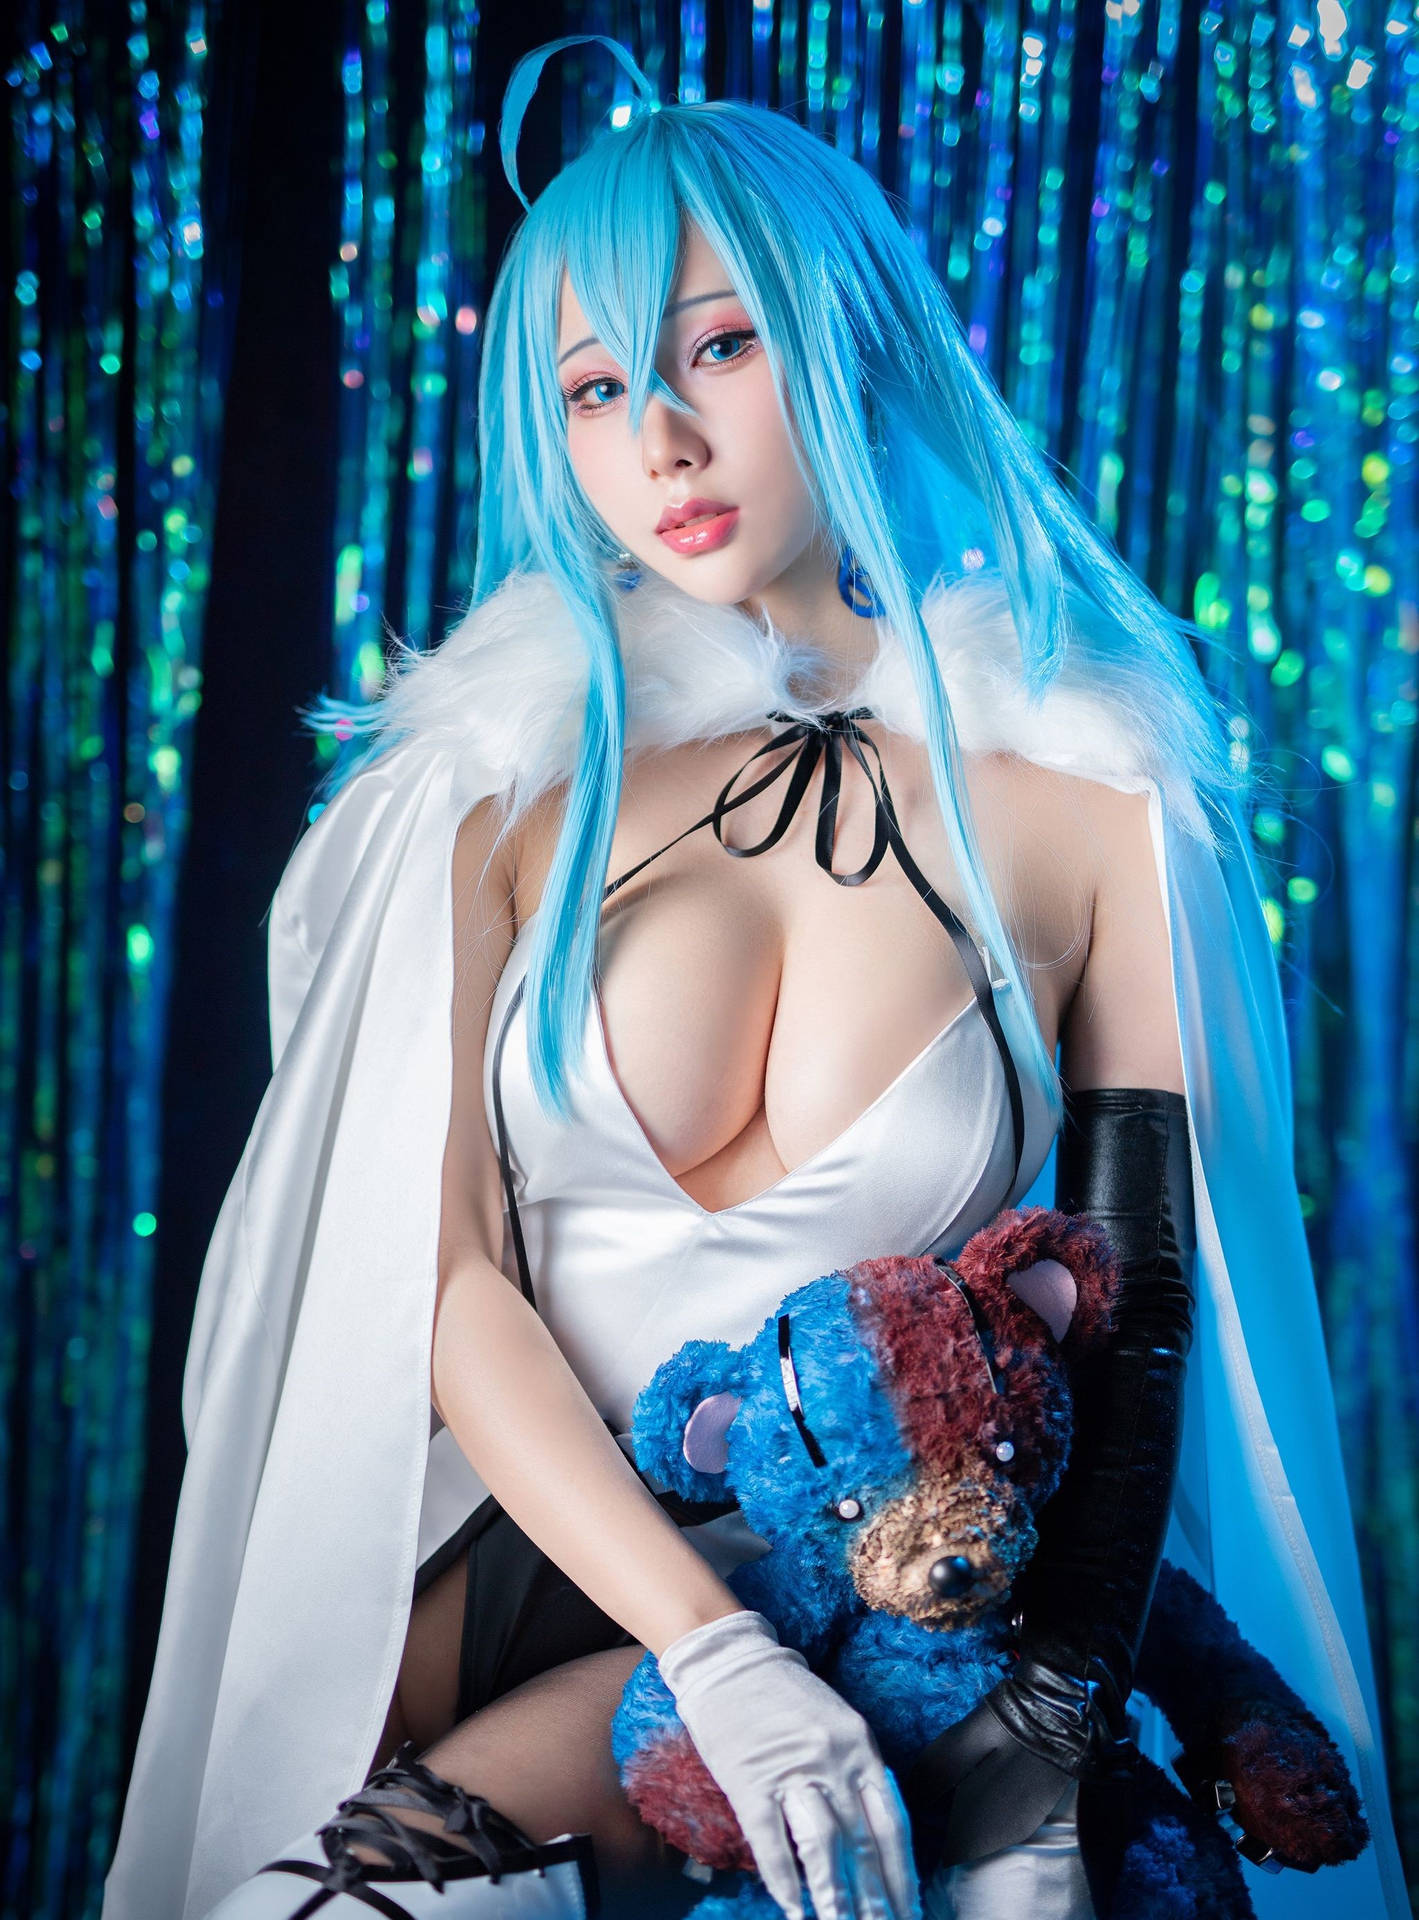 Hd android wallpapers 1080p sexy cosplay